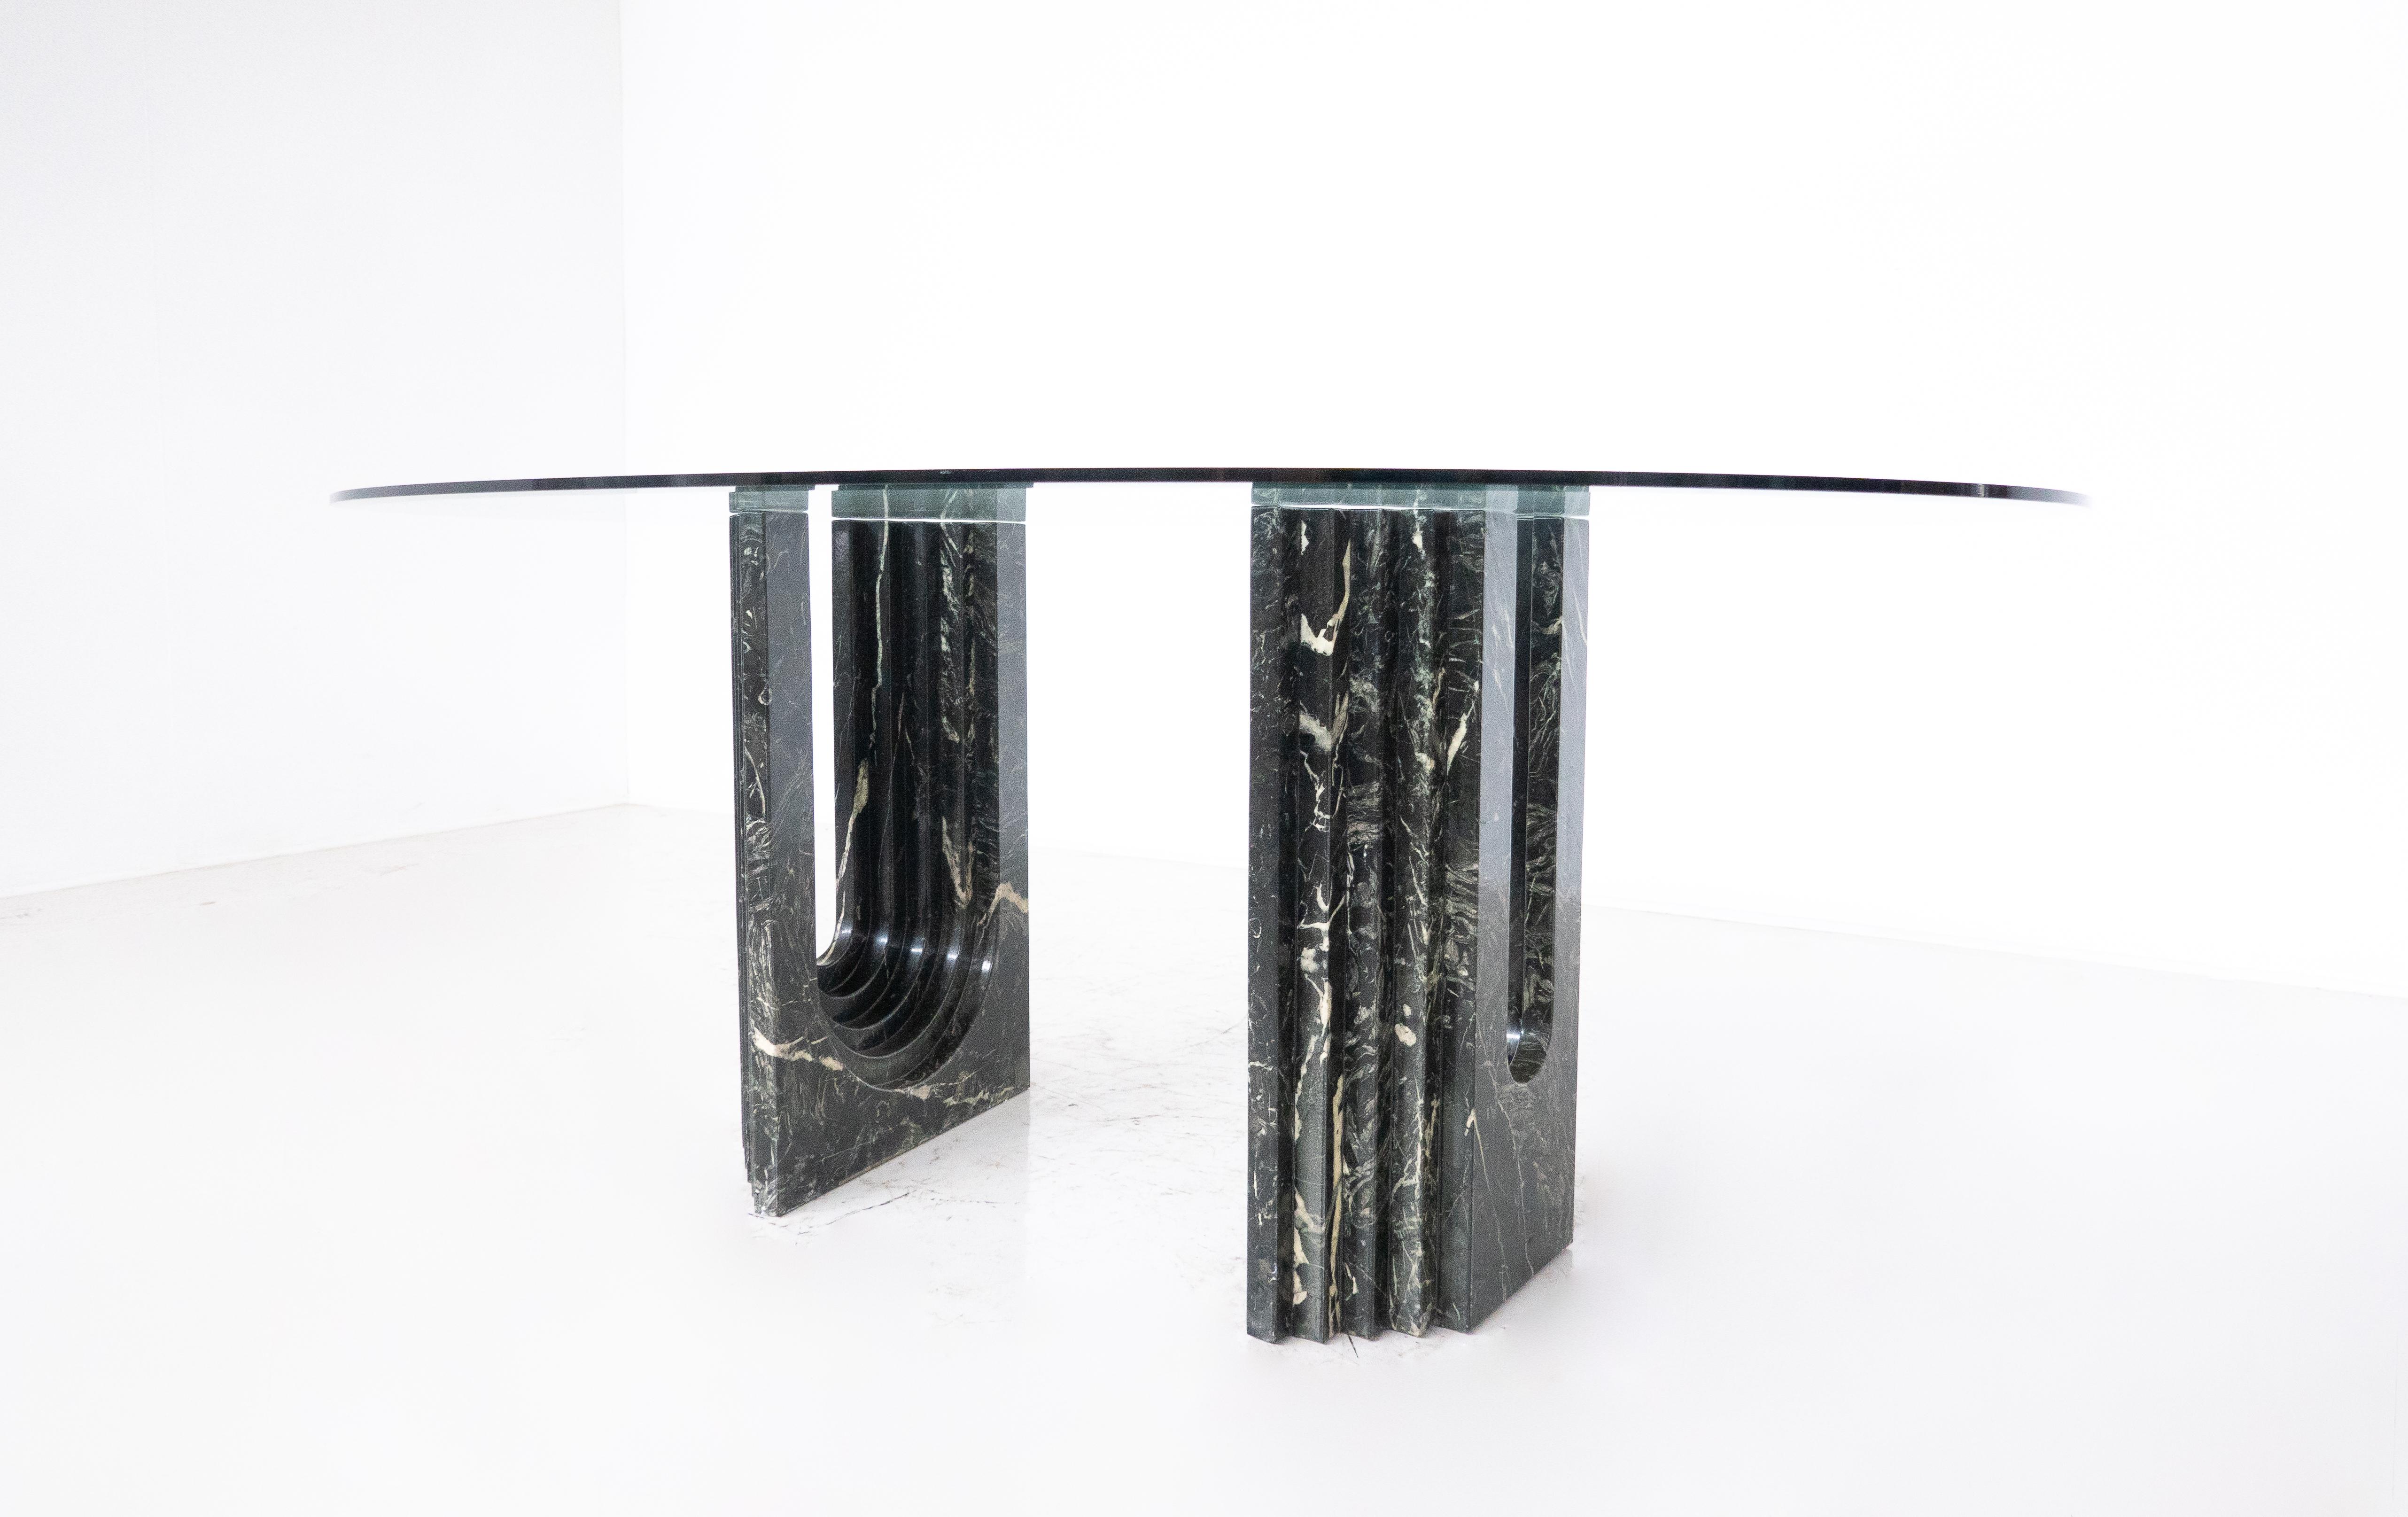 Mid-Century Modern Dining Table by Carlo Scarpa, Marble and Glass, Italy, 1960s For Sale 4